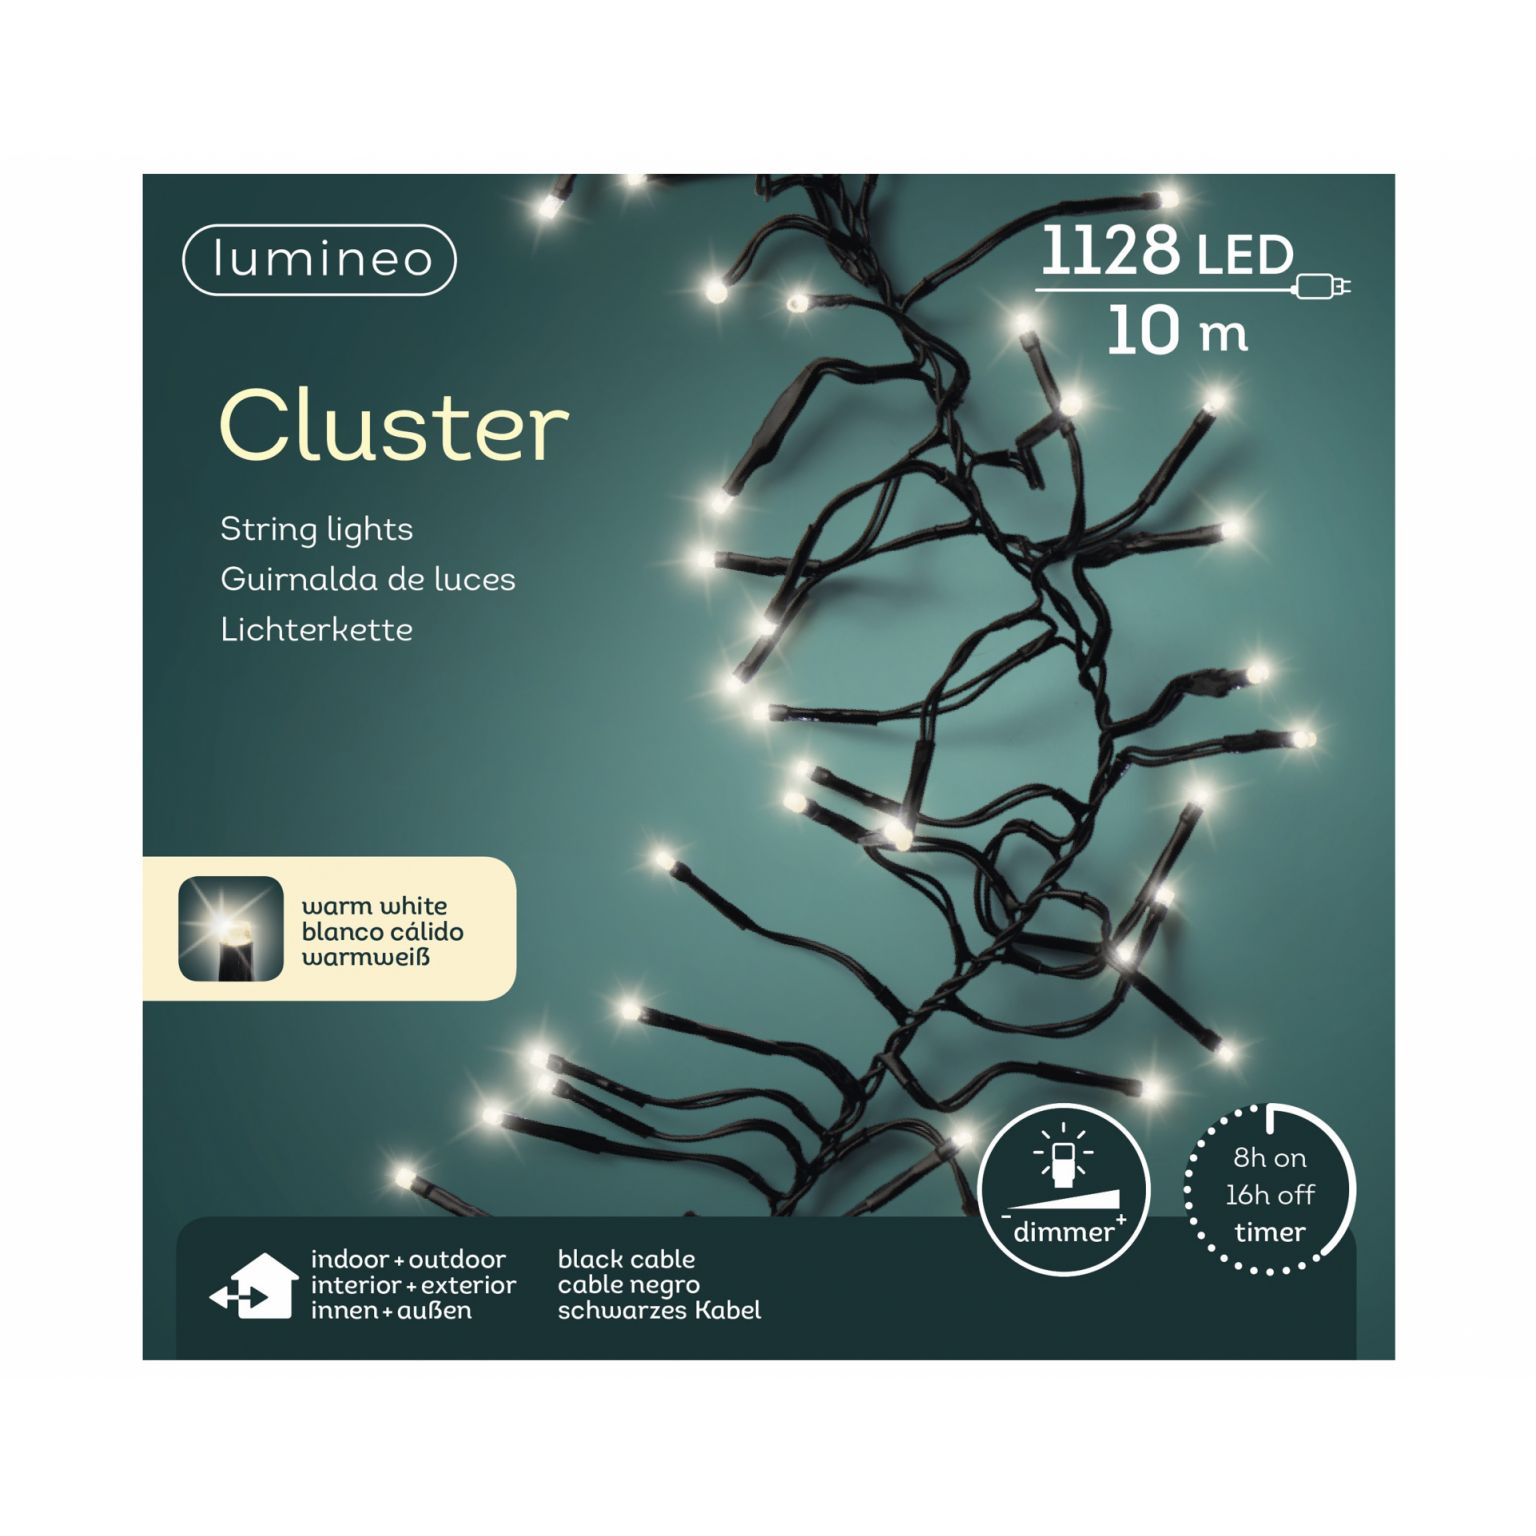 Clusterverlichting lumineo 1128-lamps LED 'warm wit'